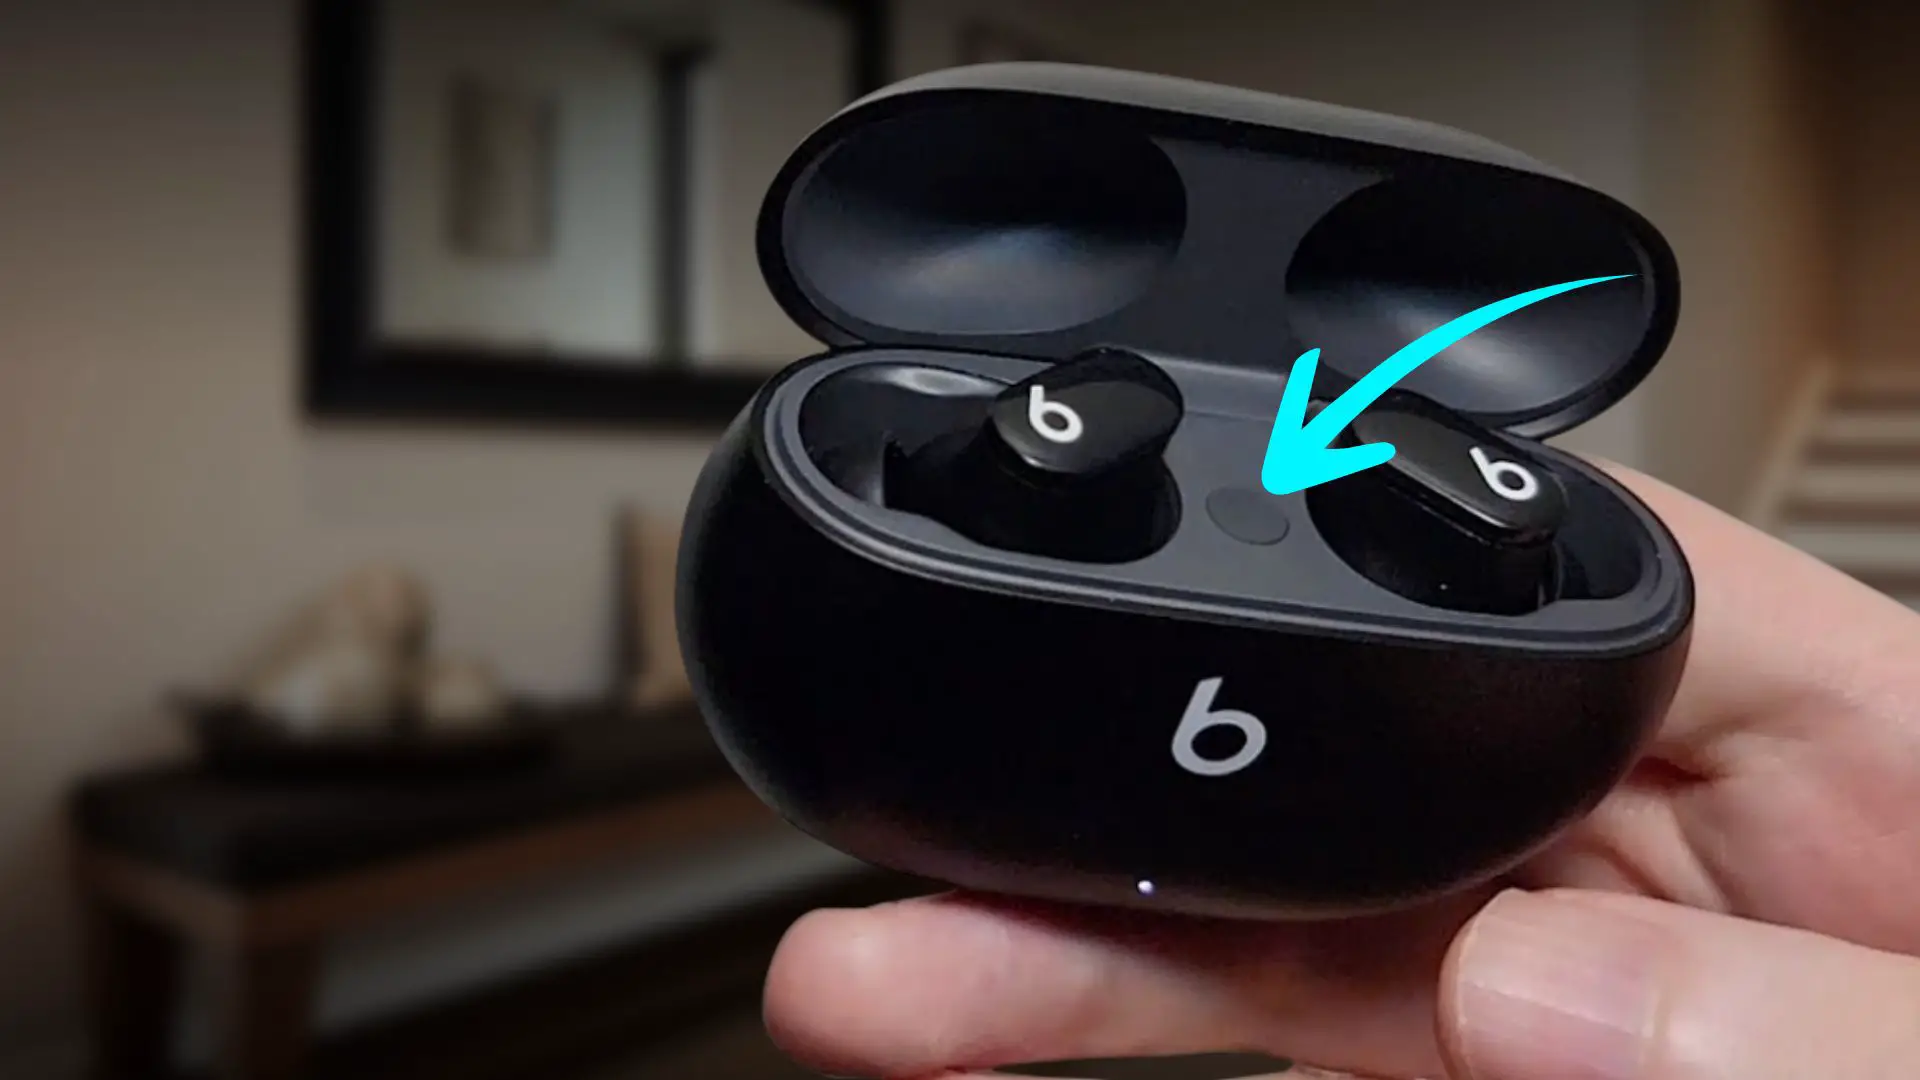 Put Beats earbuds in pairing mode